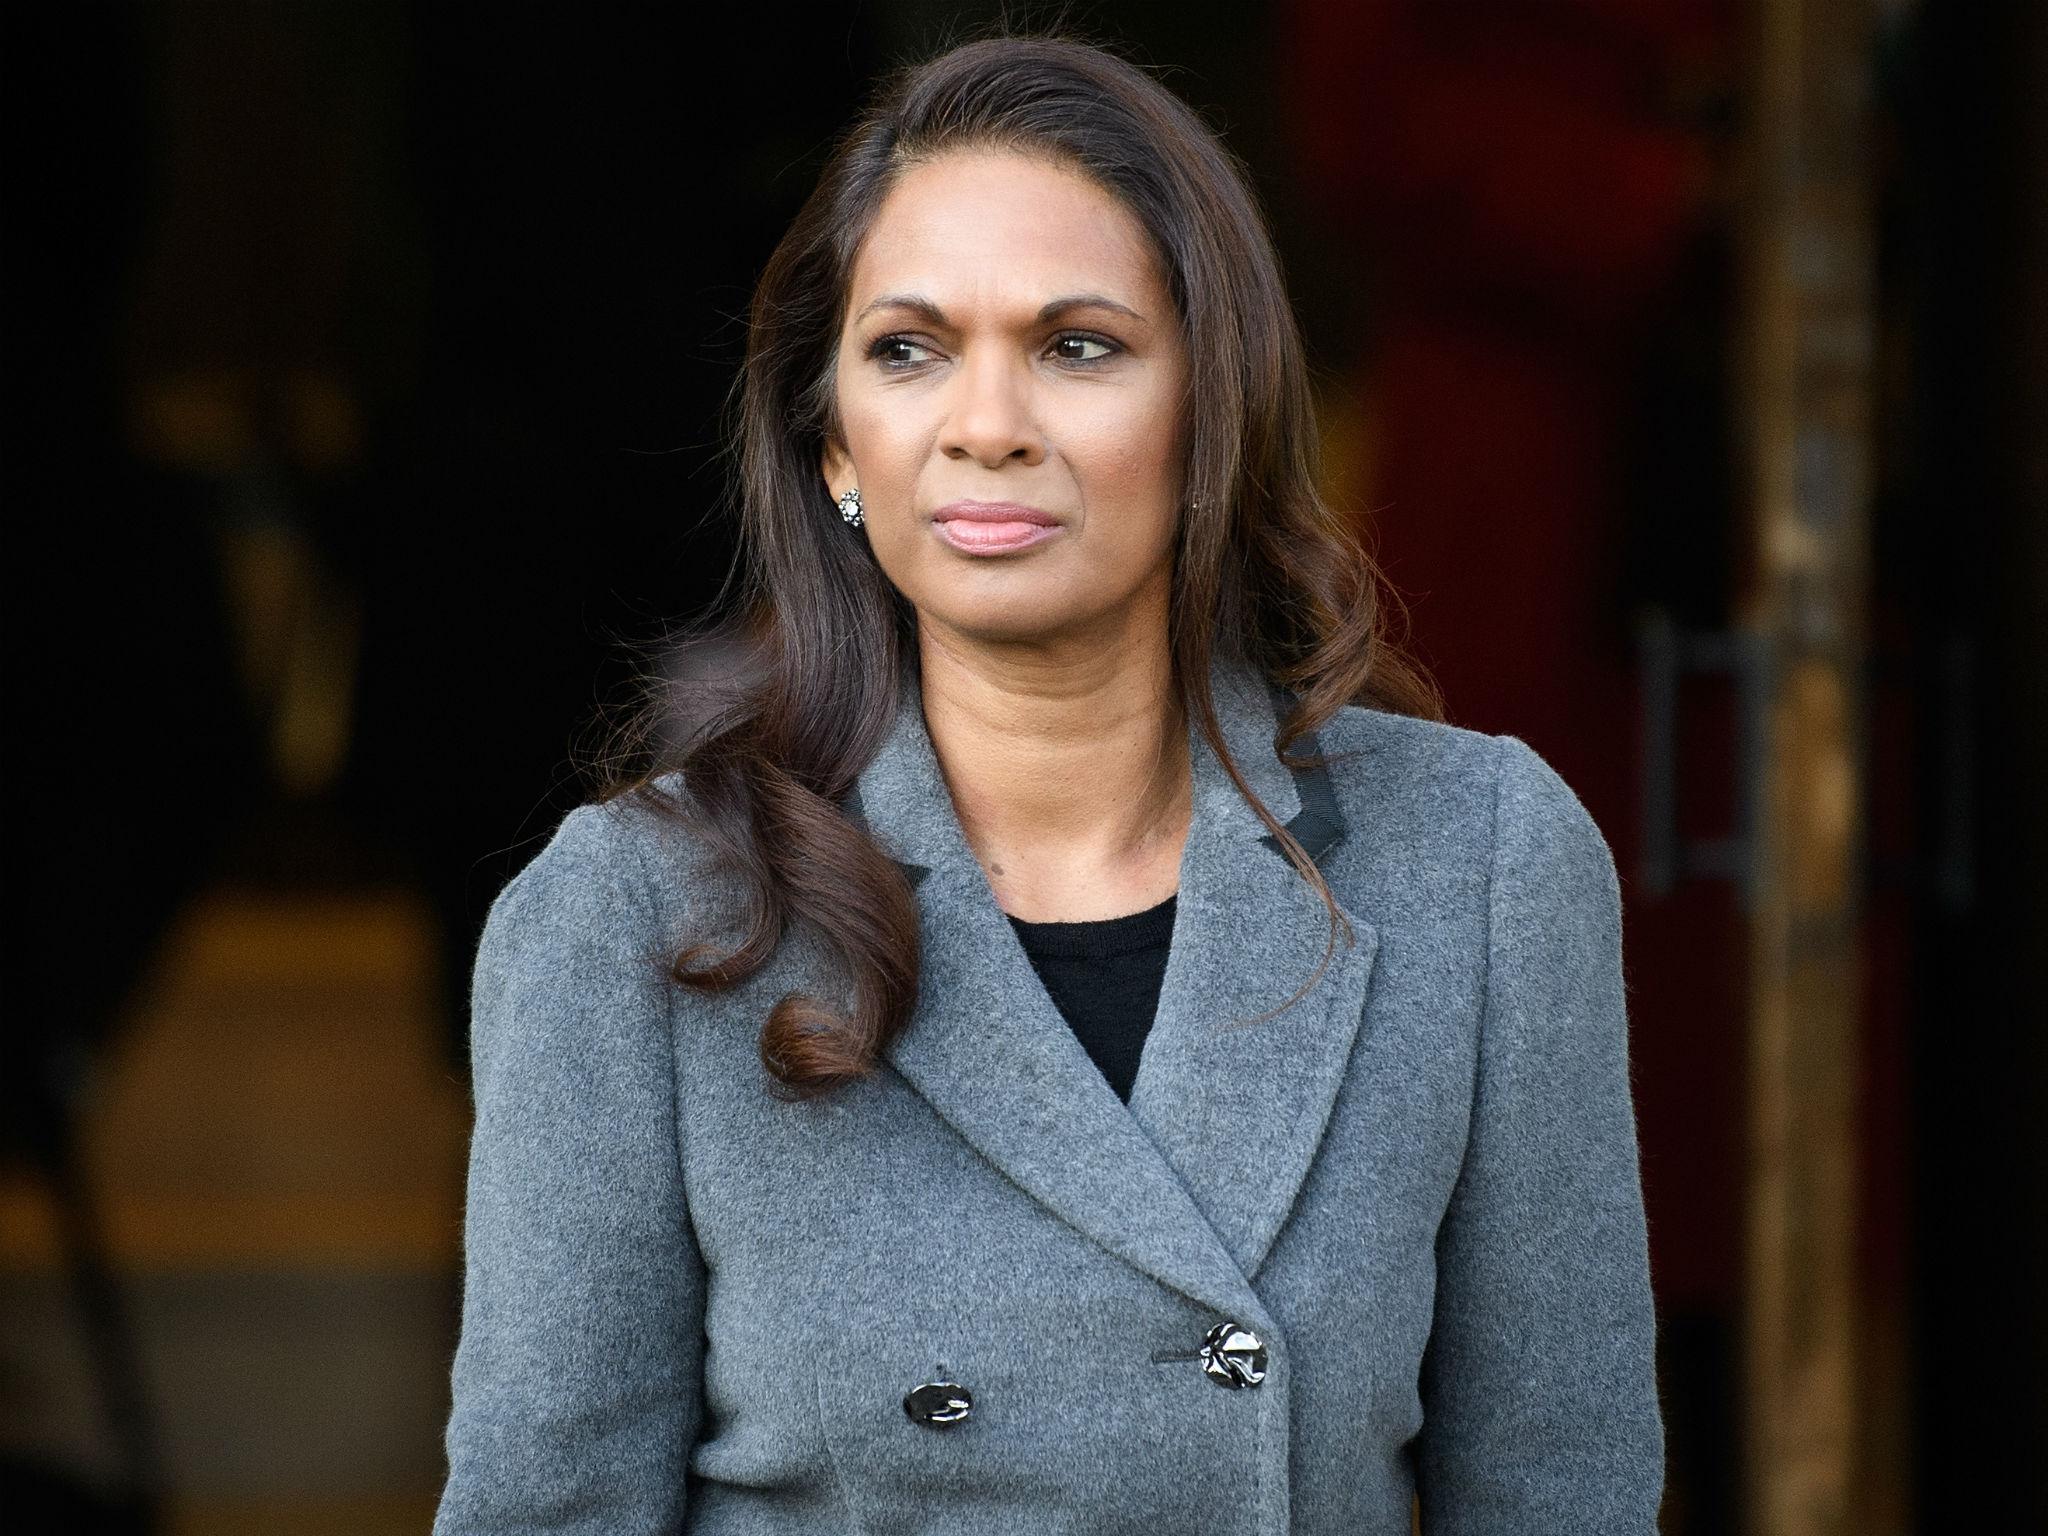 Gina Miller launched a legal challenge demanding the Government consult Parliament before triggering Article 50